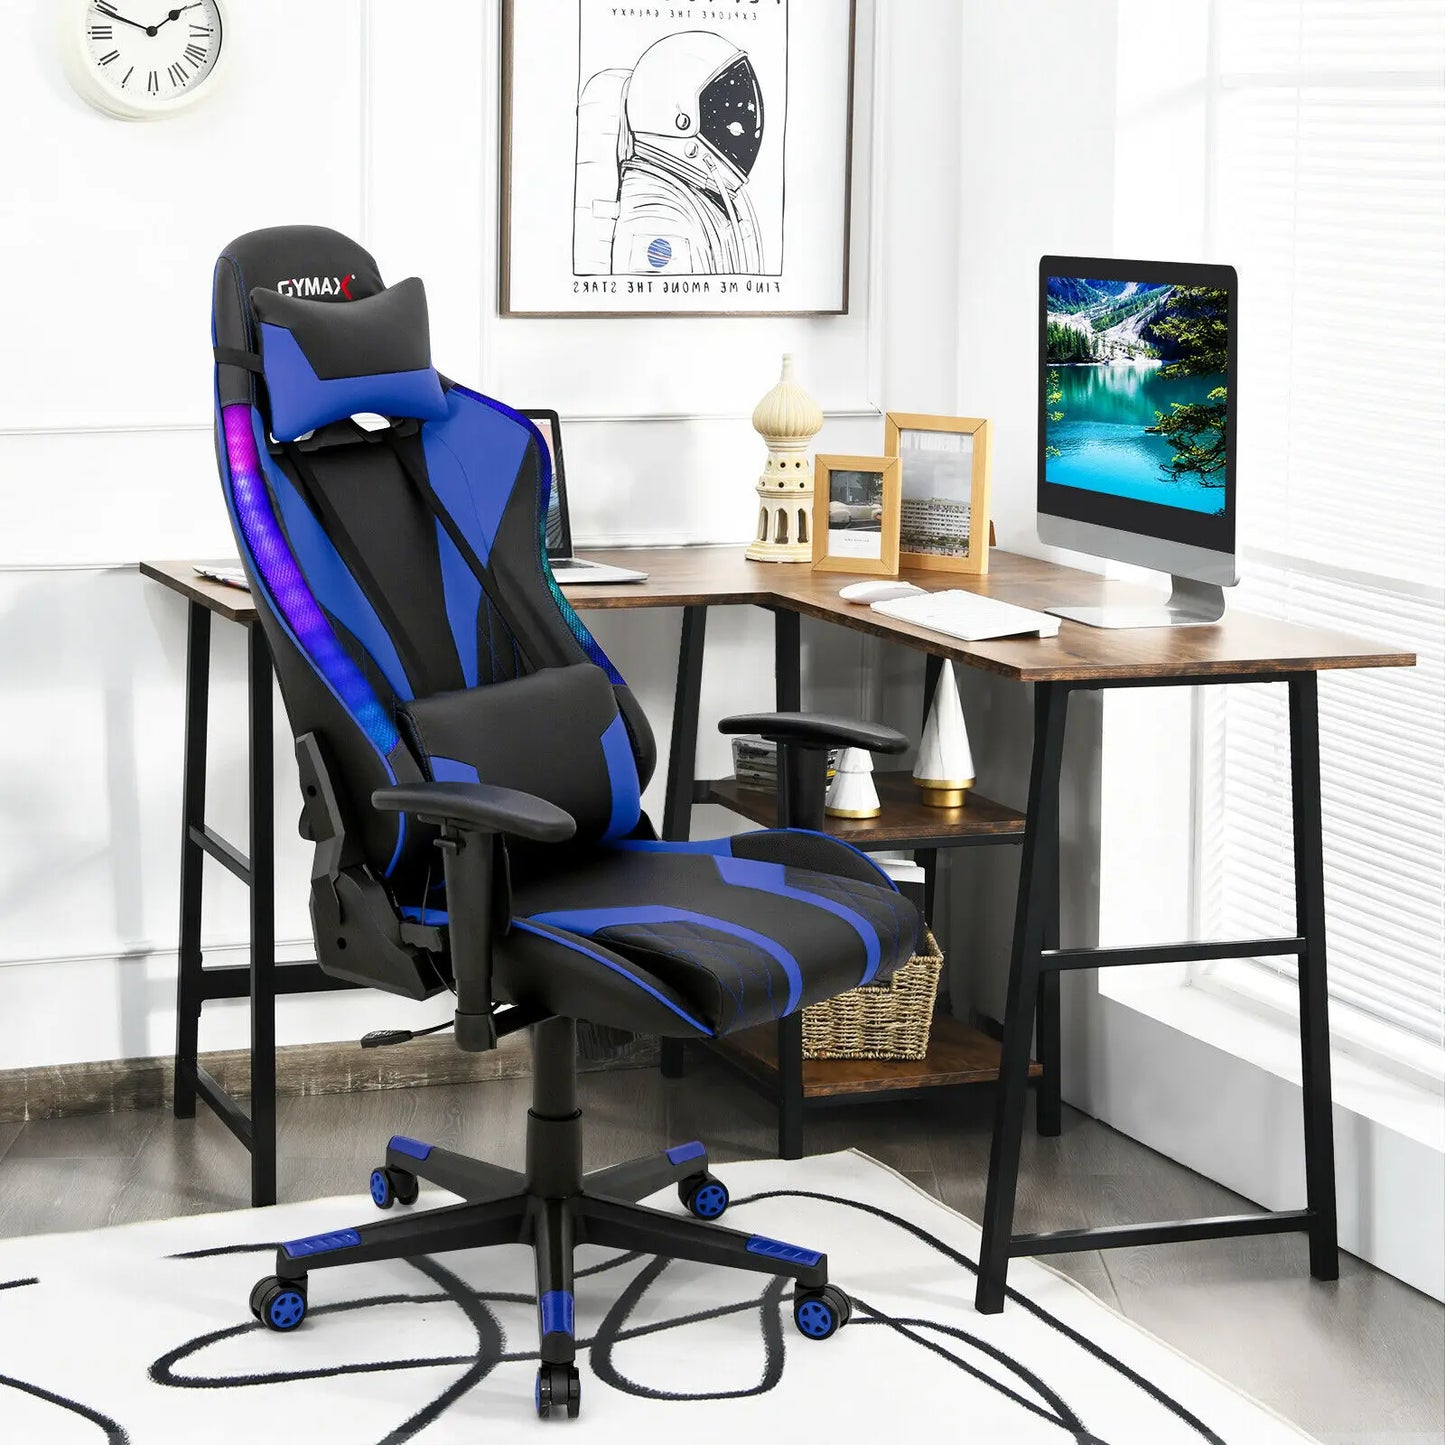 Costway Adjustable Gaming Chair with Dynamic LED Lights